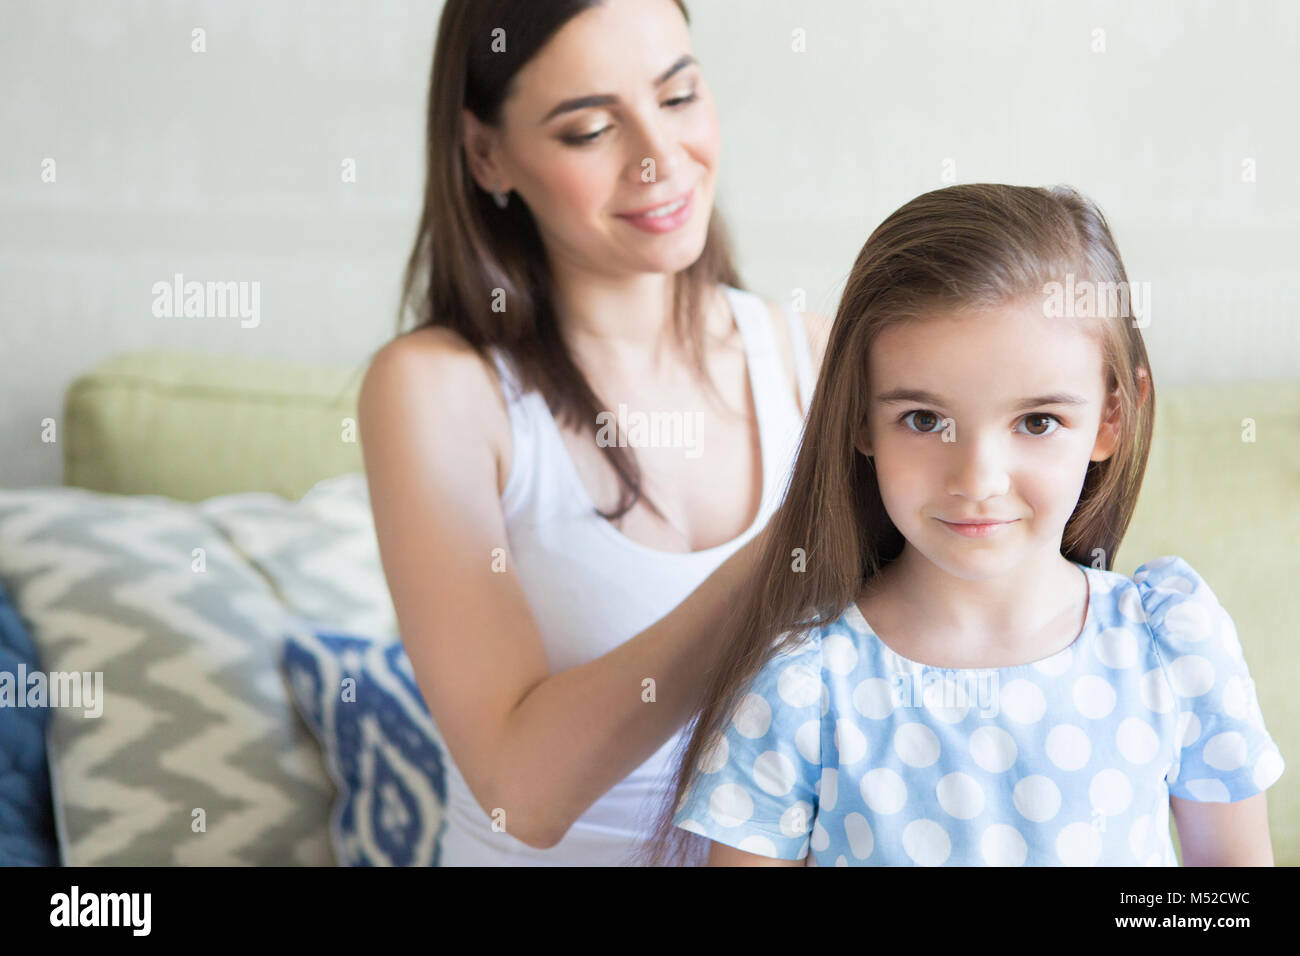 Adorable young family in living room. Mother combing her daughter's hair. Happiness and love concept Stock Photo